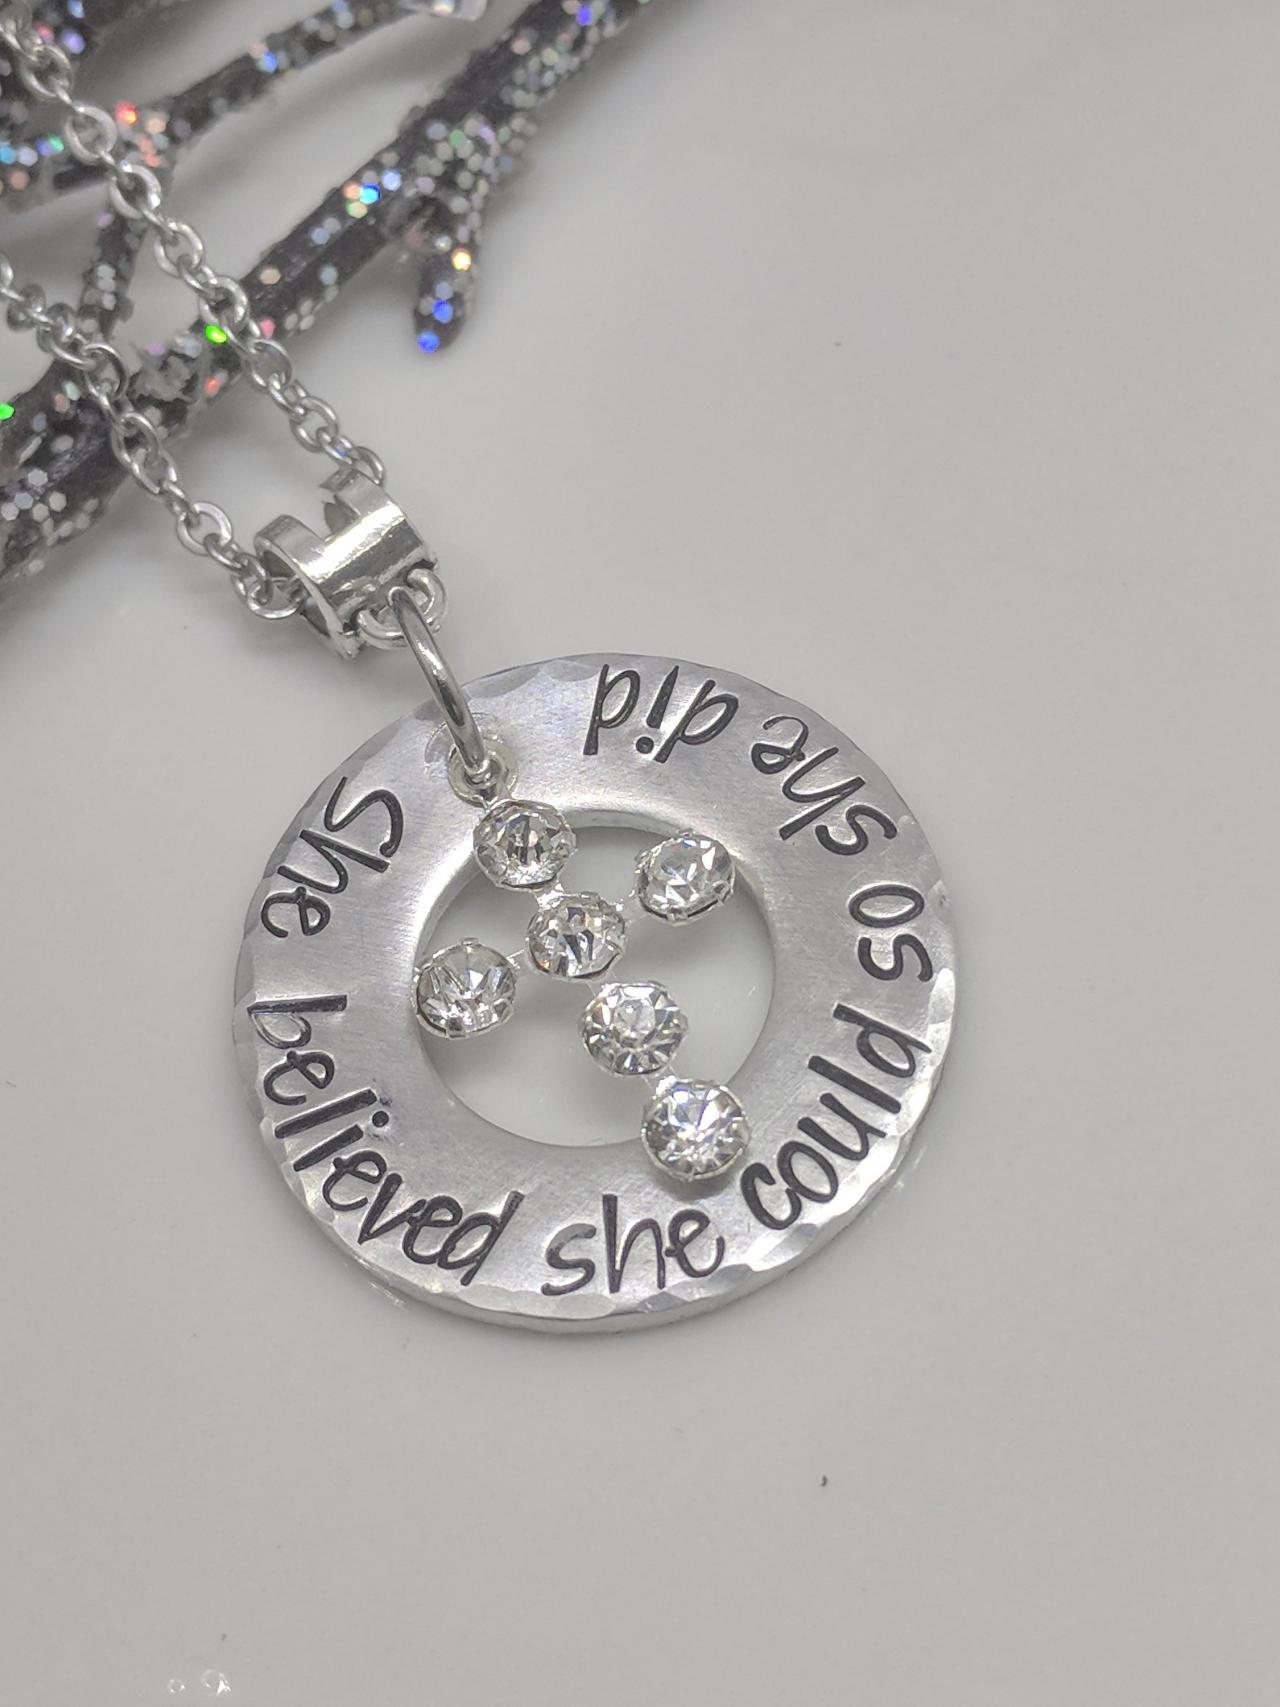 She Believed She Could So She Did Necklace-graduation Gift-inspirational Gift-motivational Jewelry-encouragement Quote-statement Jewelry